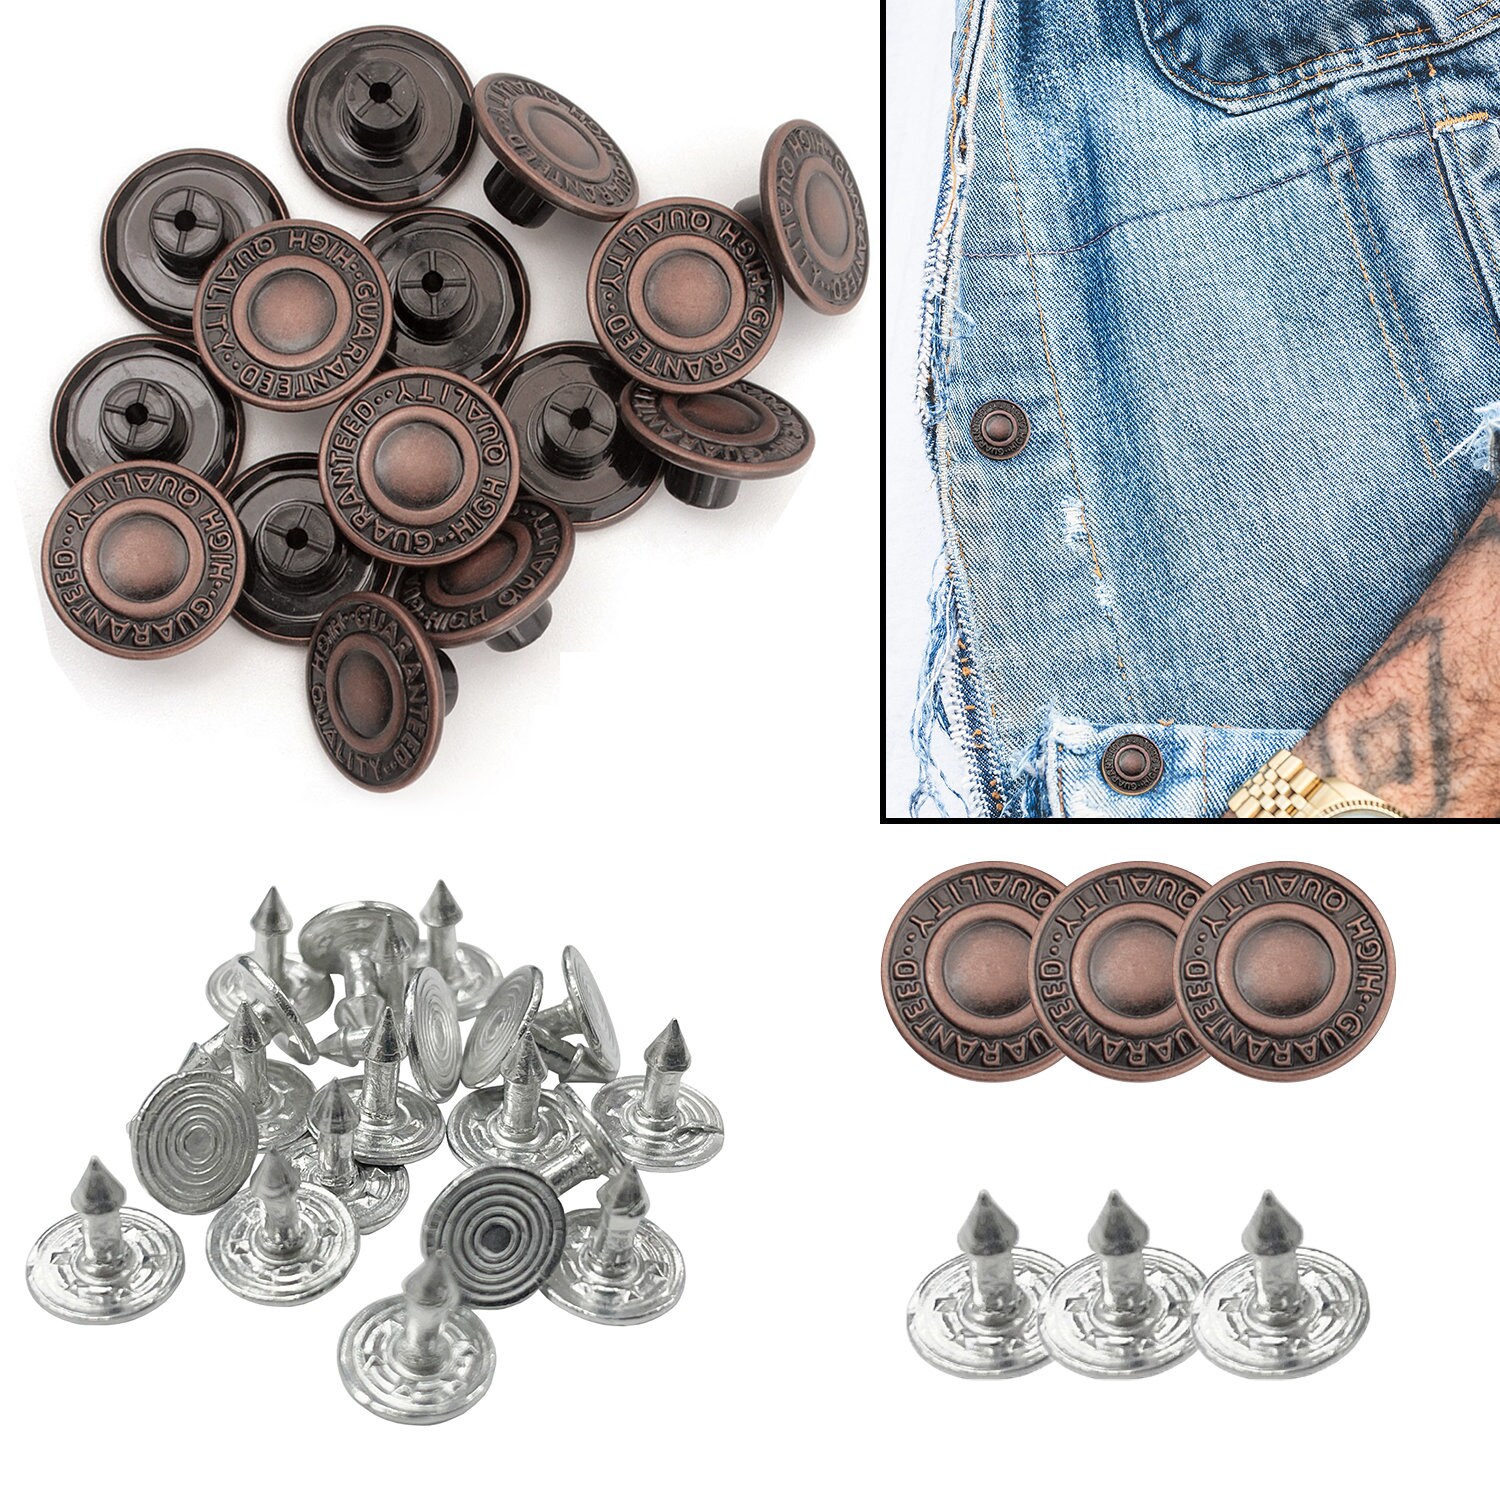 8 Sets Button Pins for Jeans, Jean Button Pins for Loose Jeans, No Sew and No Tools Instant Replacement Snap Tack Pant Button, Ceryvop Reusable and Ad